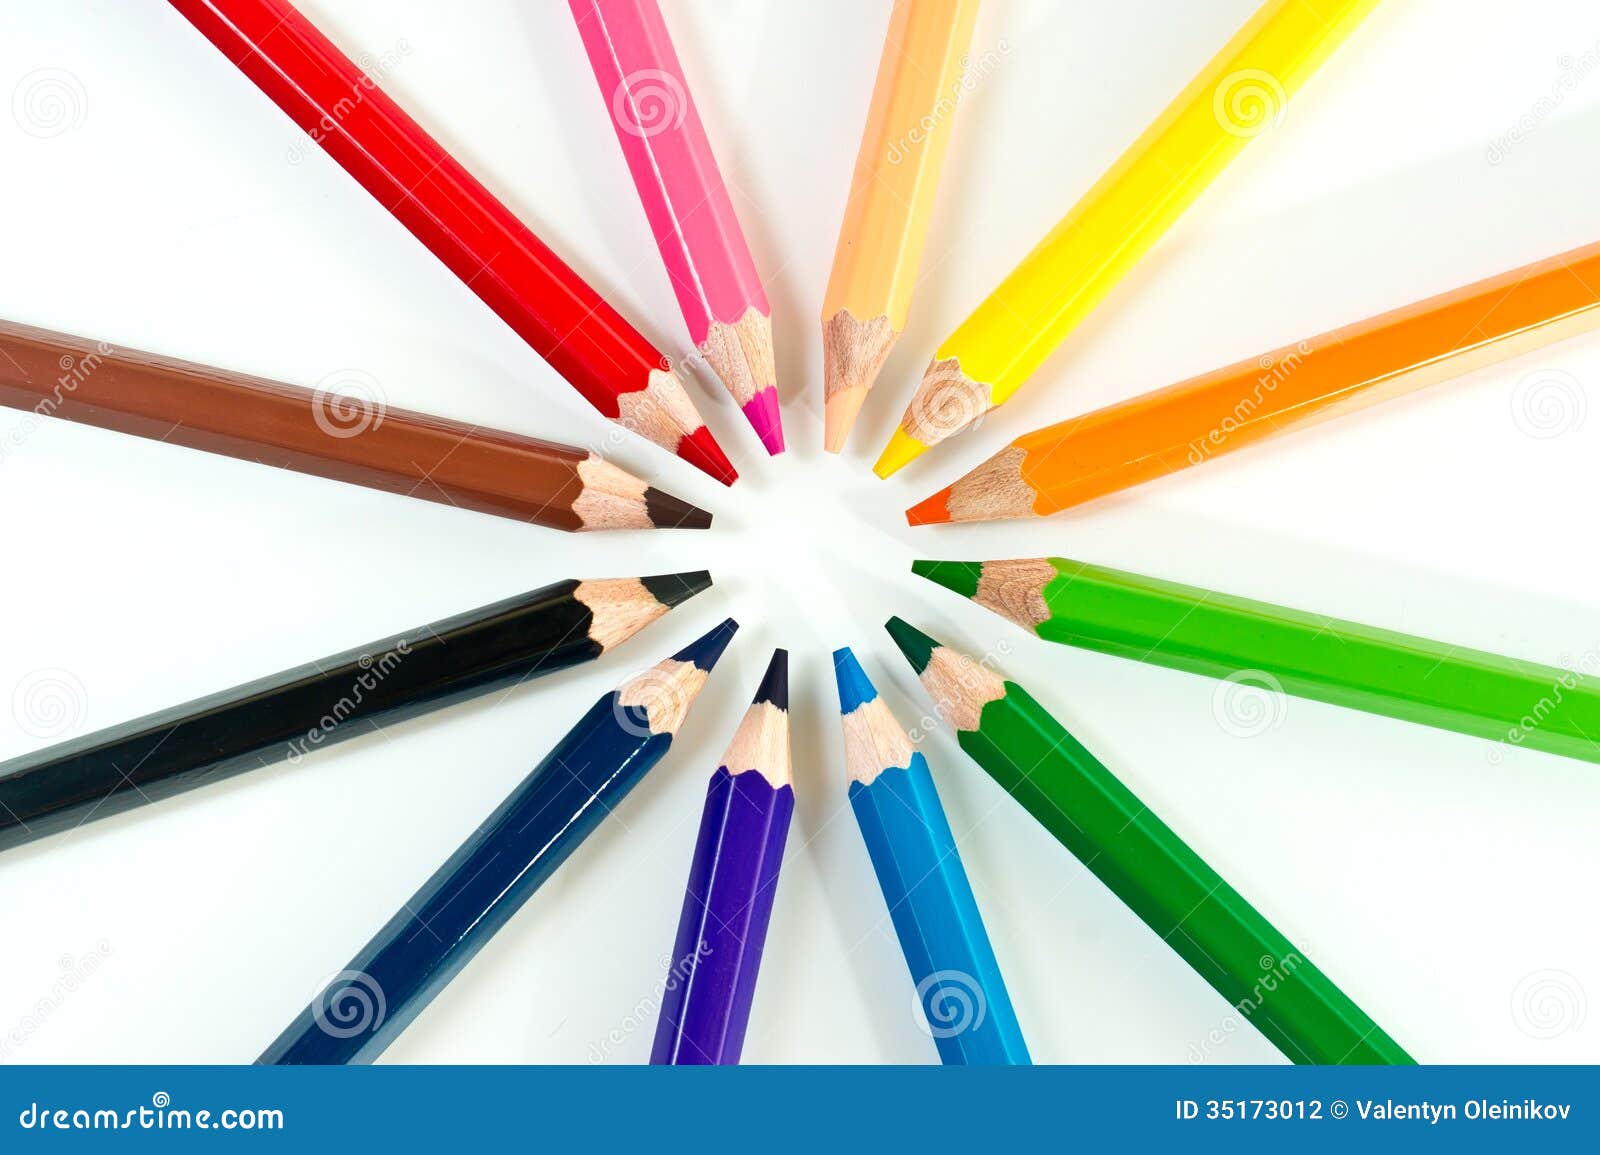 group of colored pencils